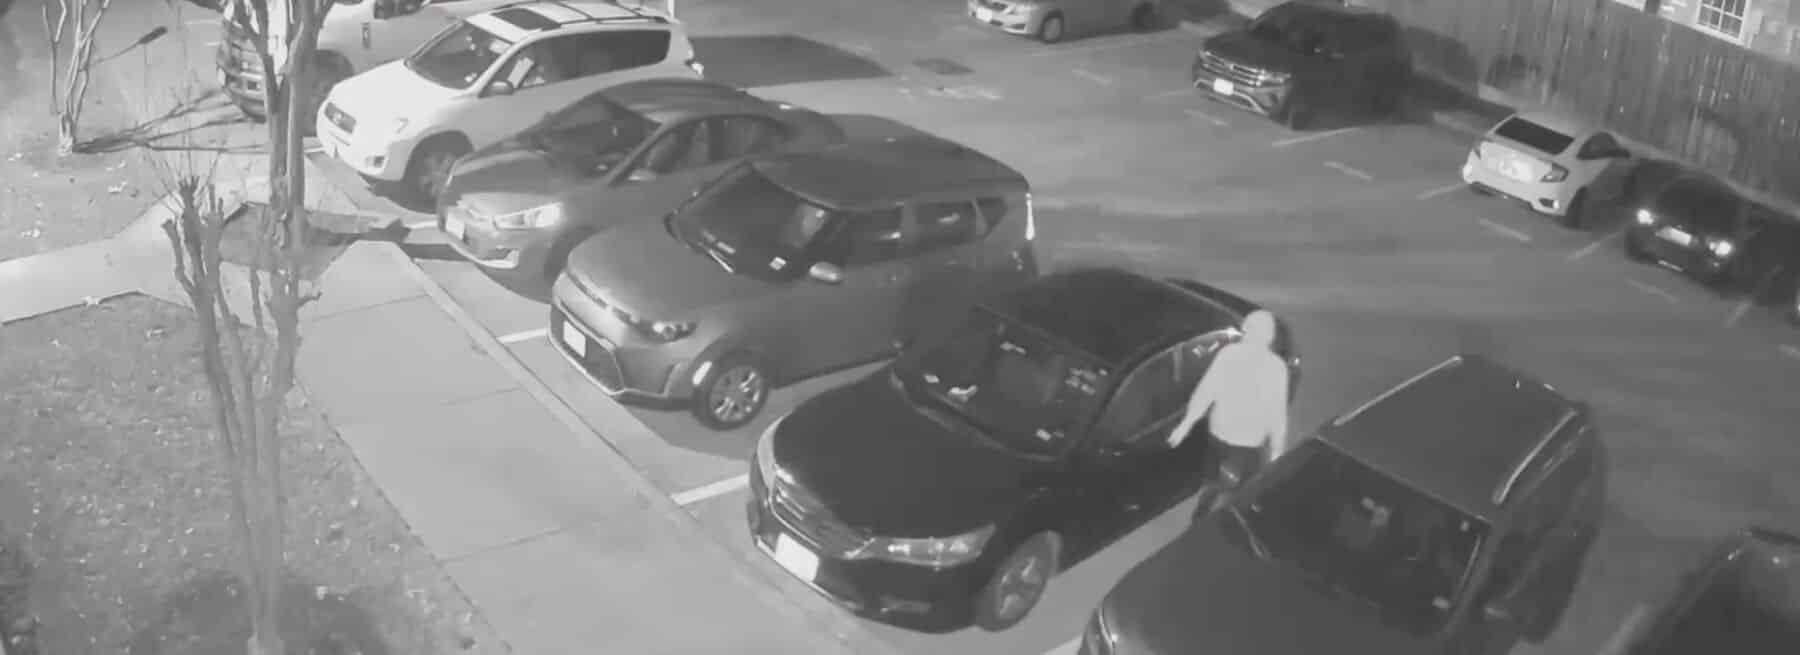 Several people caught attempting to break-into vehicles in an apartment parking lot